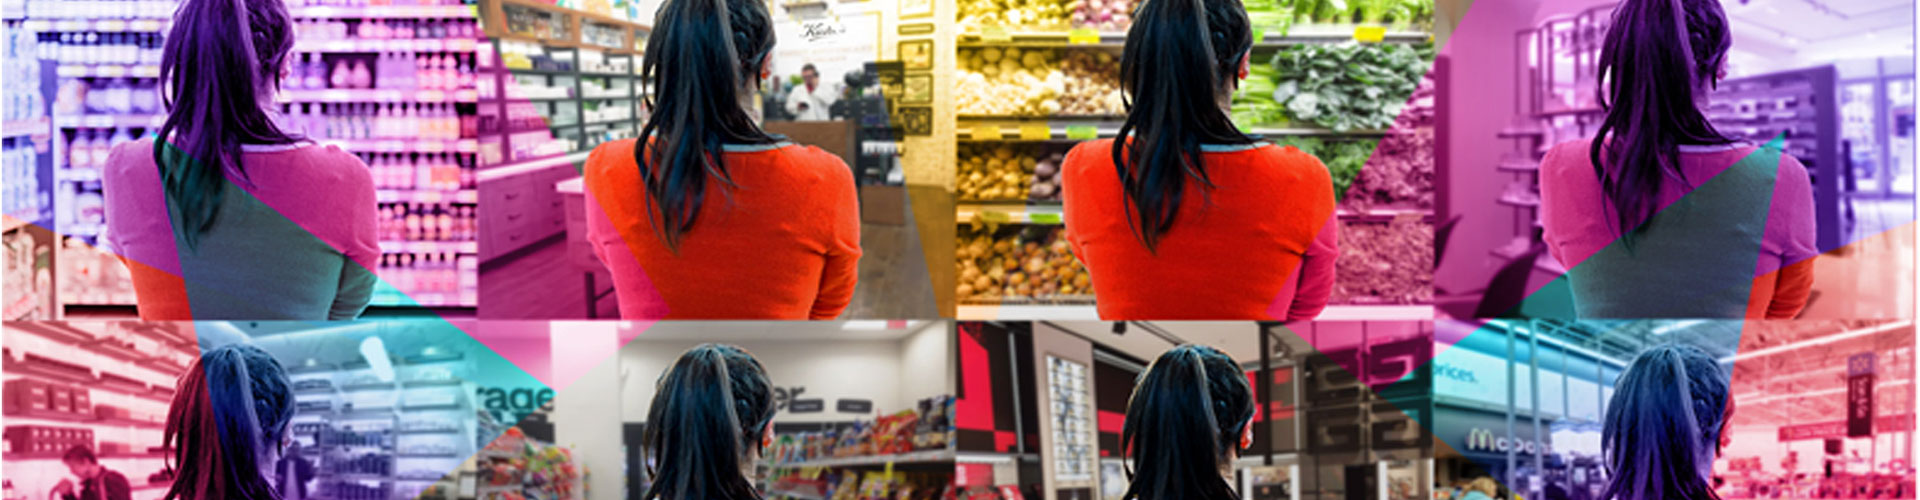 Blog banner featuring tiled image of woman looking at shelves with colorful overlay